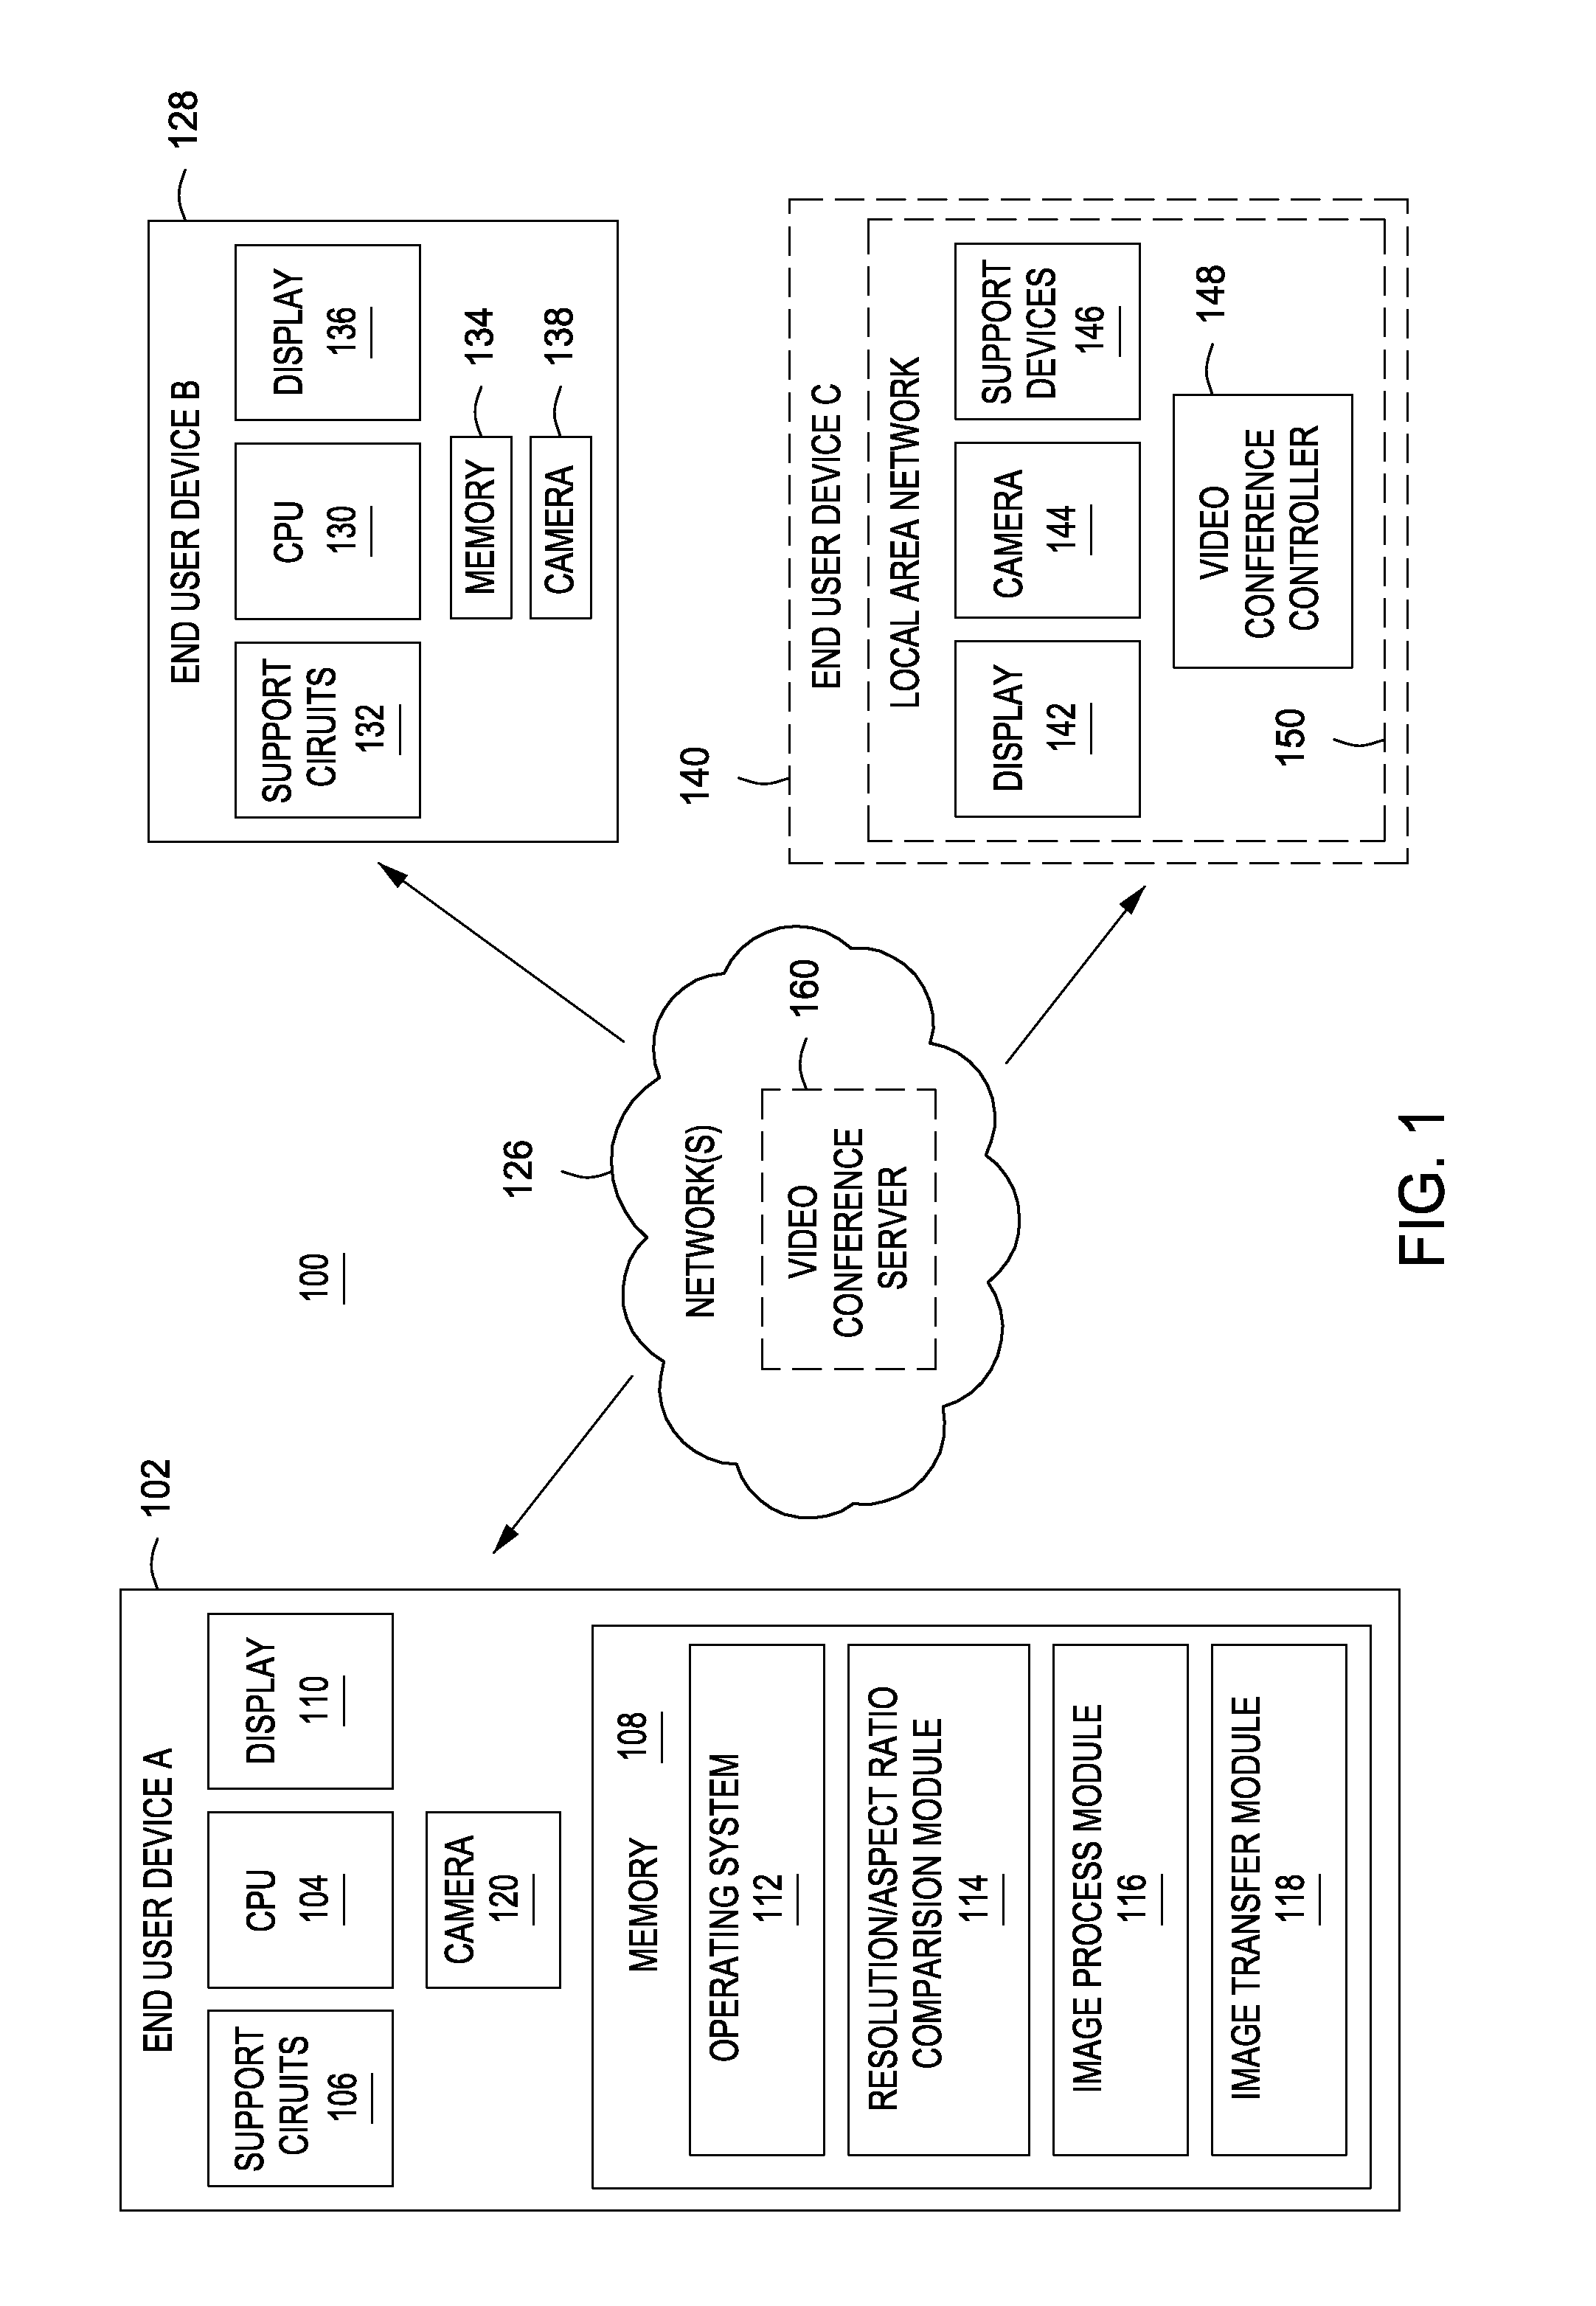 Method and apparatus for dynamically adjusting aspect ratio of images during a video call